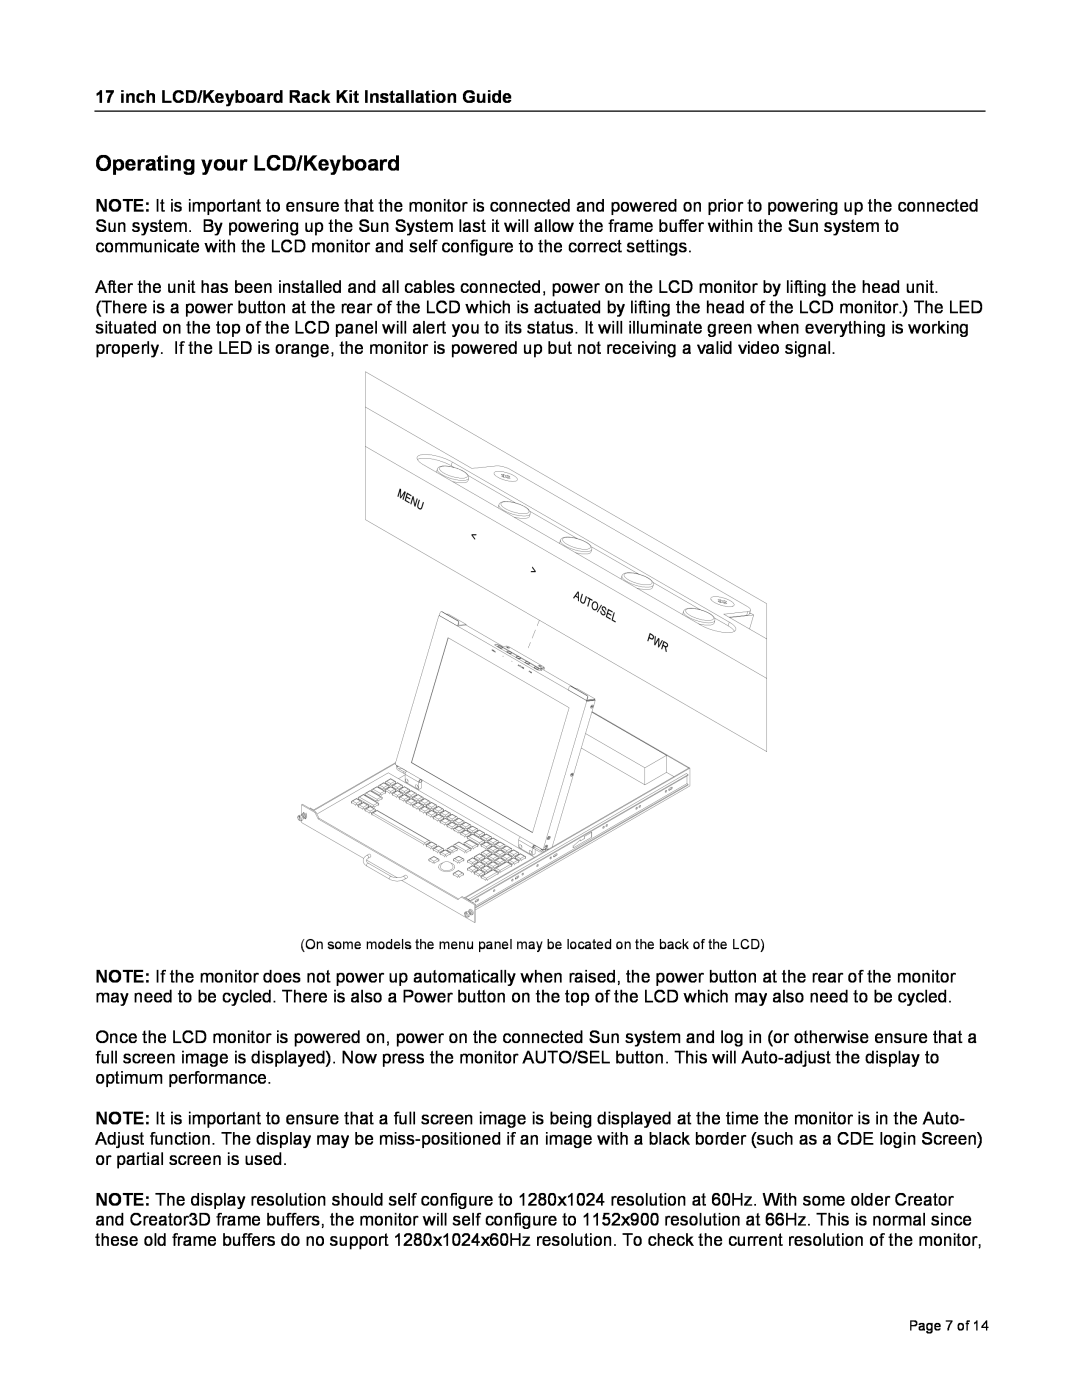 Neuro Logic Systems RFT-17 Operating your LCD/Keyboard, inch LCD/Keyboard Rack Kit Installation Guide, Page 7 of 